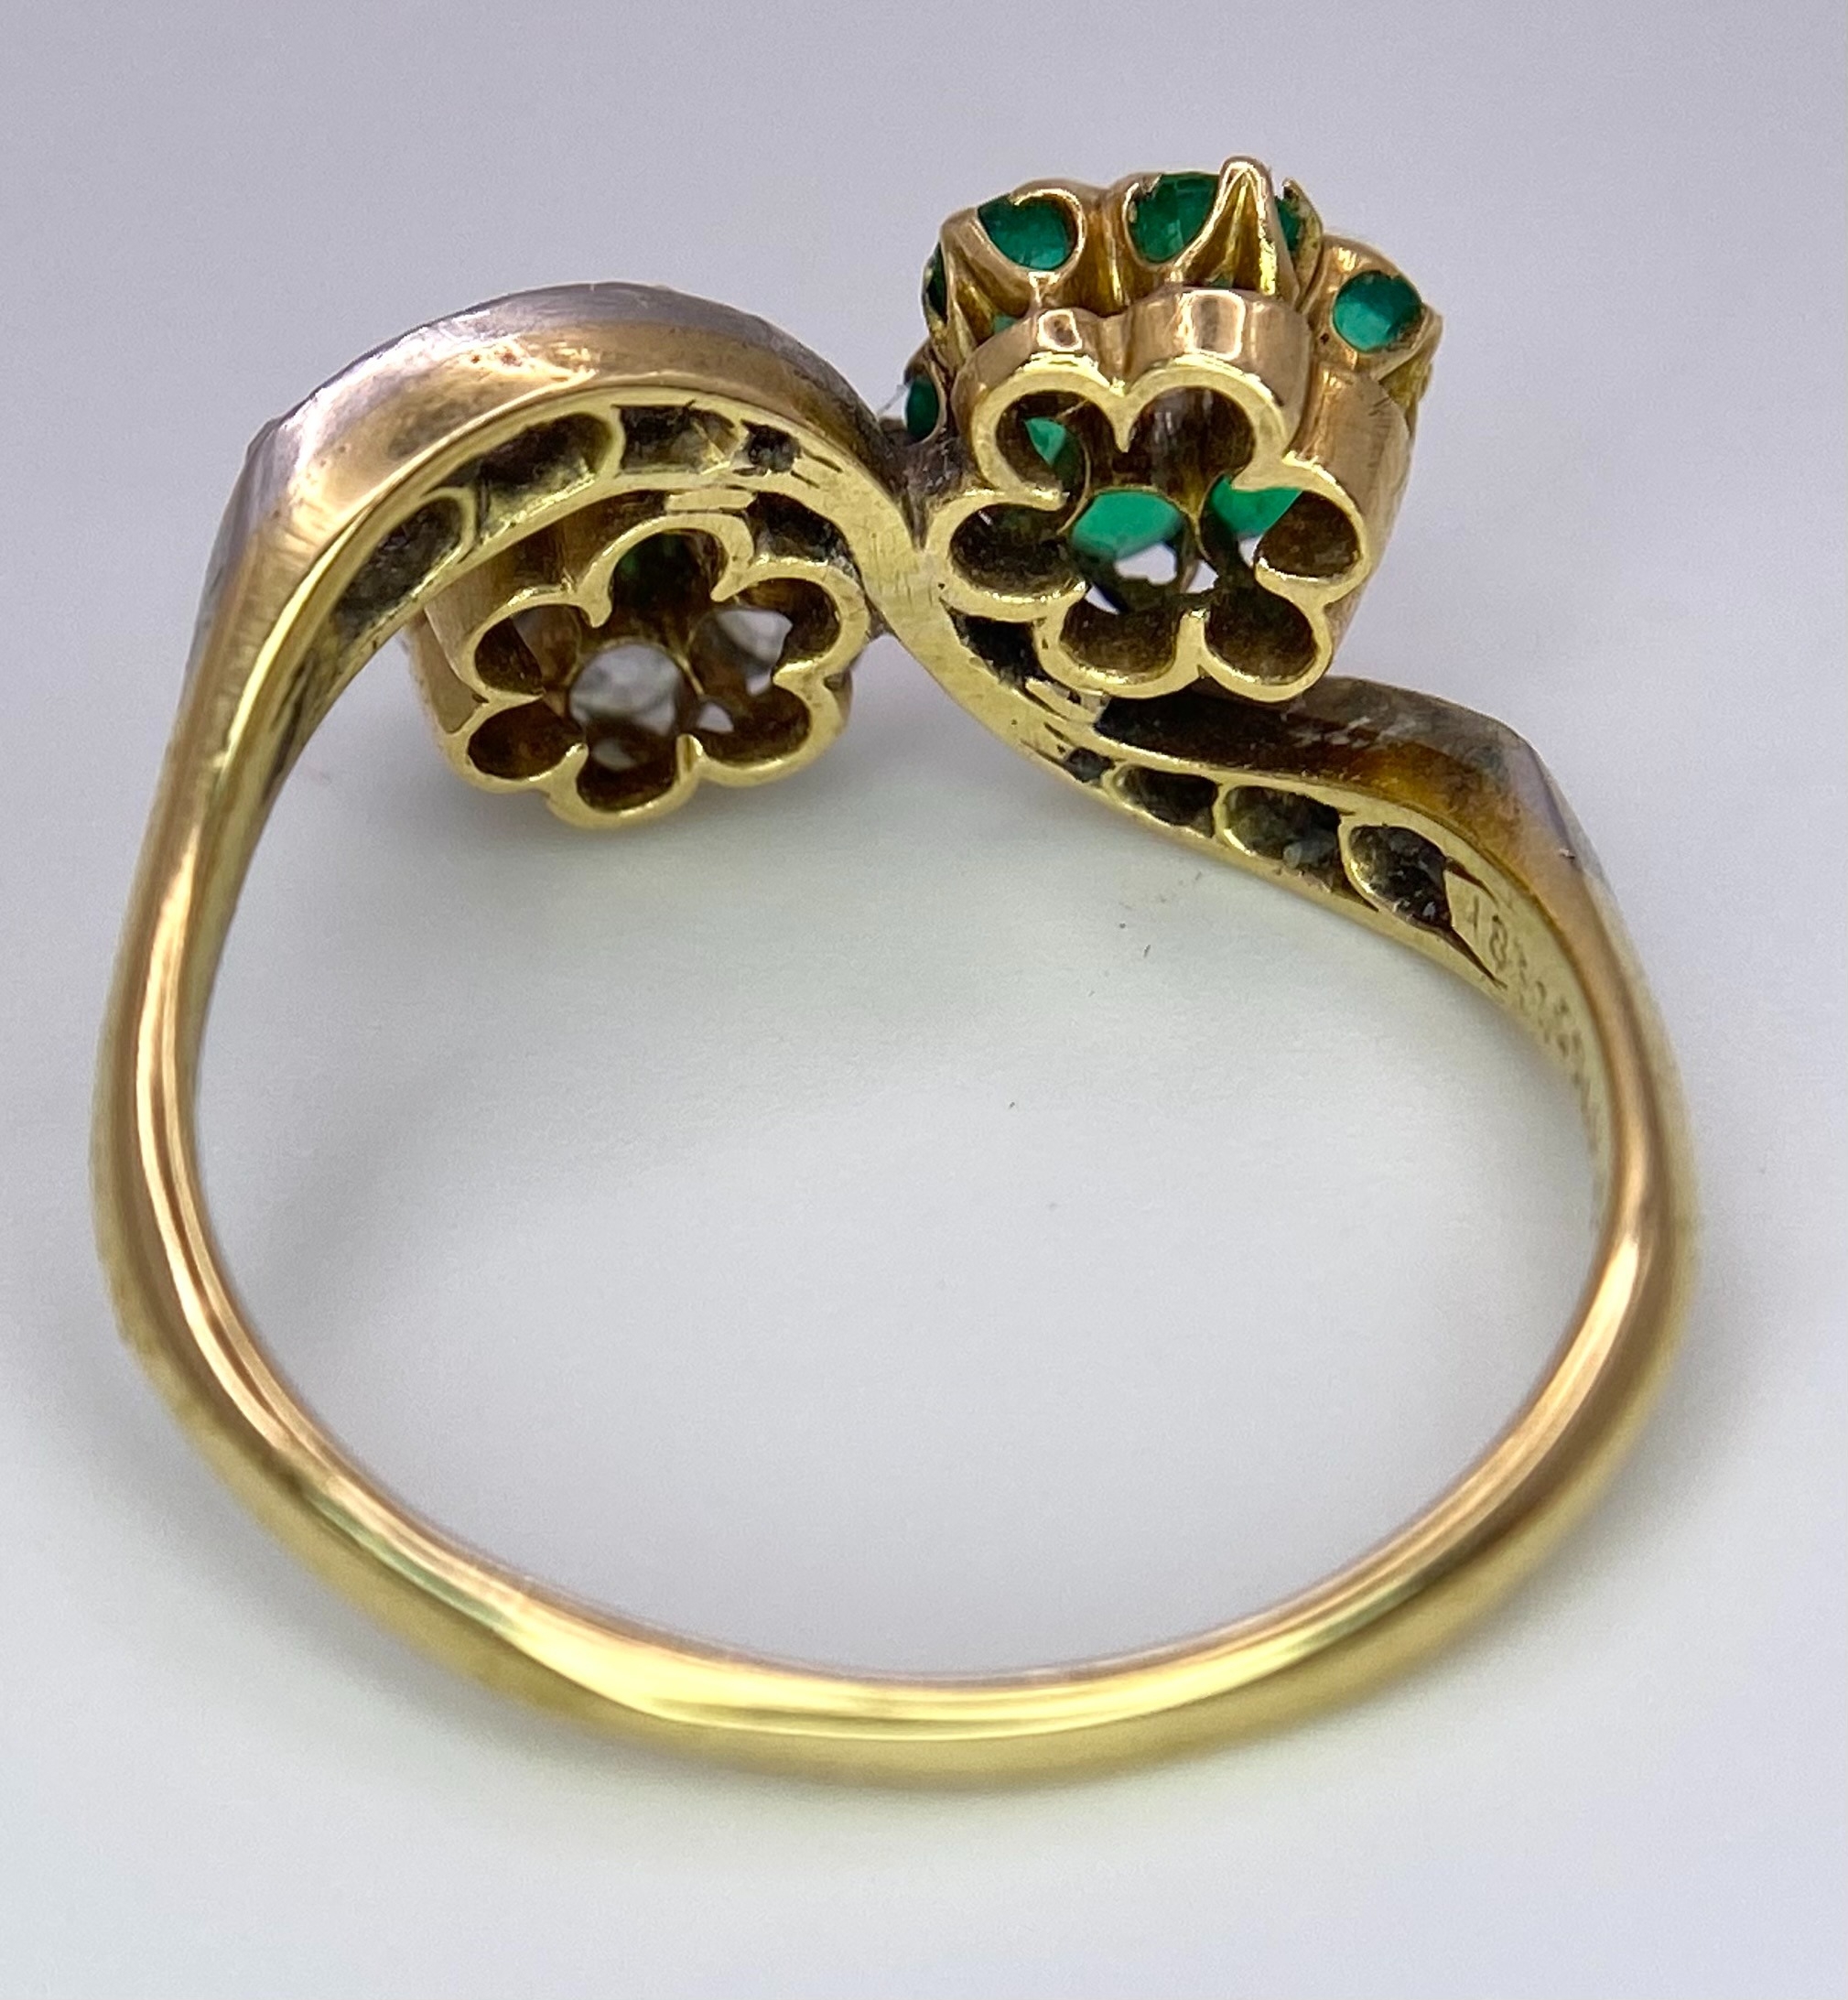 A Vintage 18K Yellow Gold, Platinum, Emerald and Diamond Crossover Ring. Reverse flowers with - Image 8 of 9